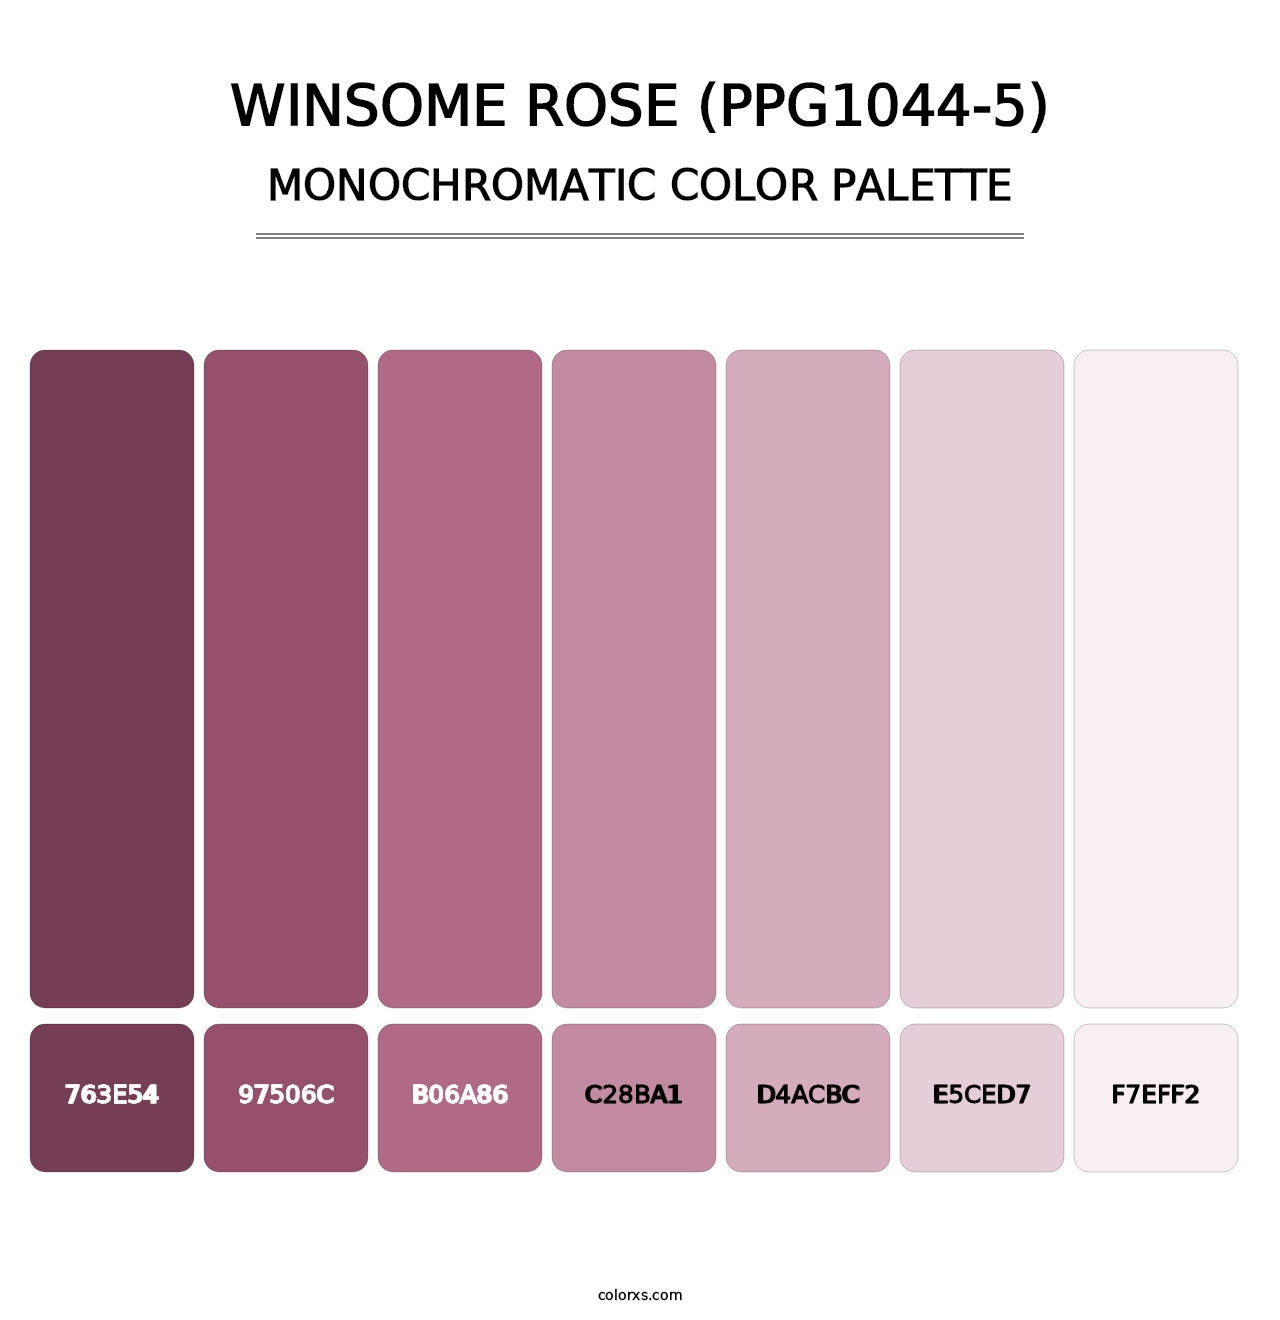 Winsome Rose (PPG1044-5) - Monochromatic Color Palette